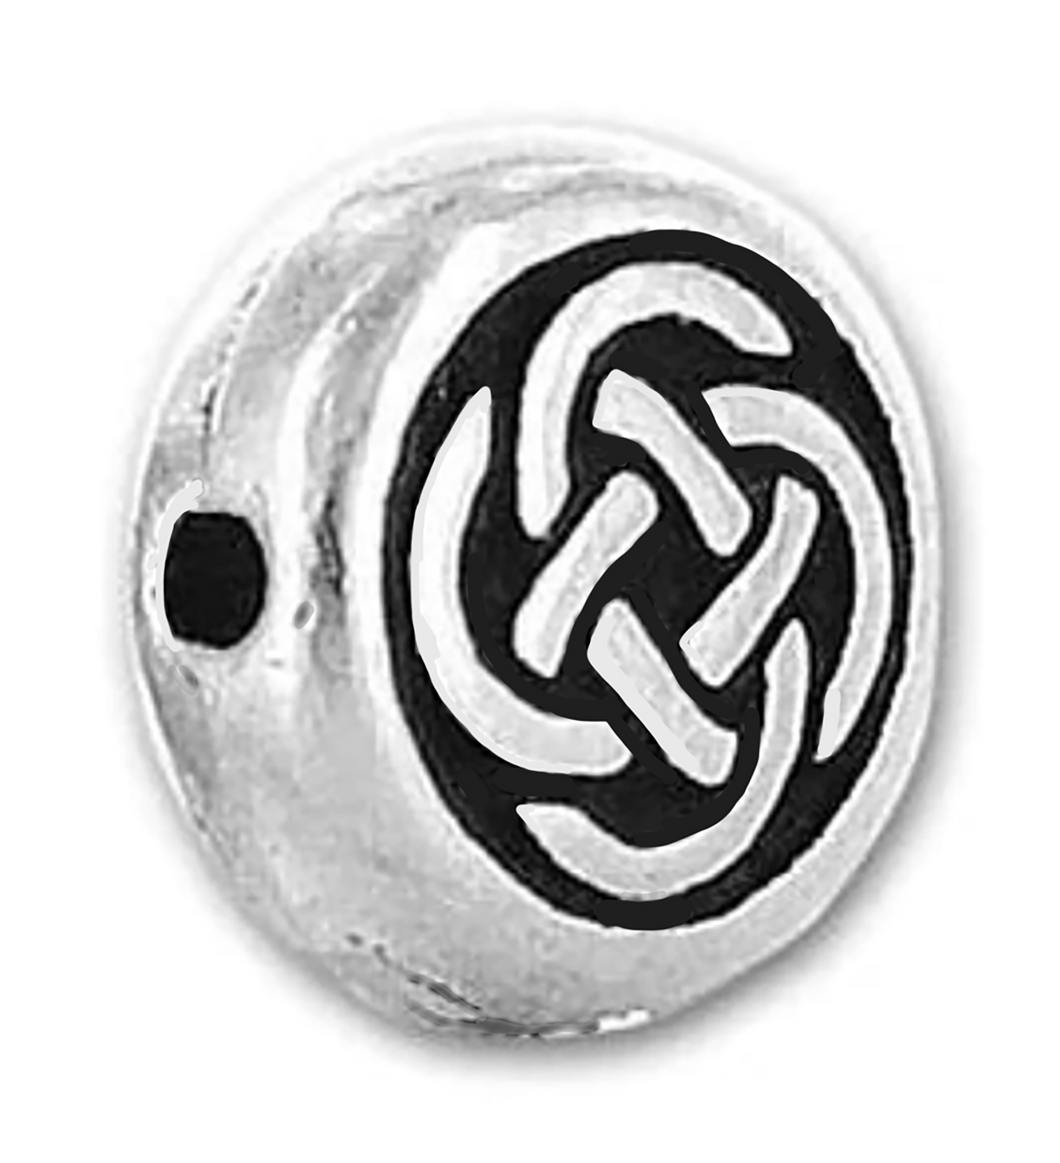 Celtic Knot Bead Small Puffed Antique Silver-Plated Pewter Bead by TerraCast